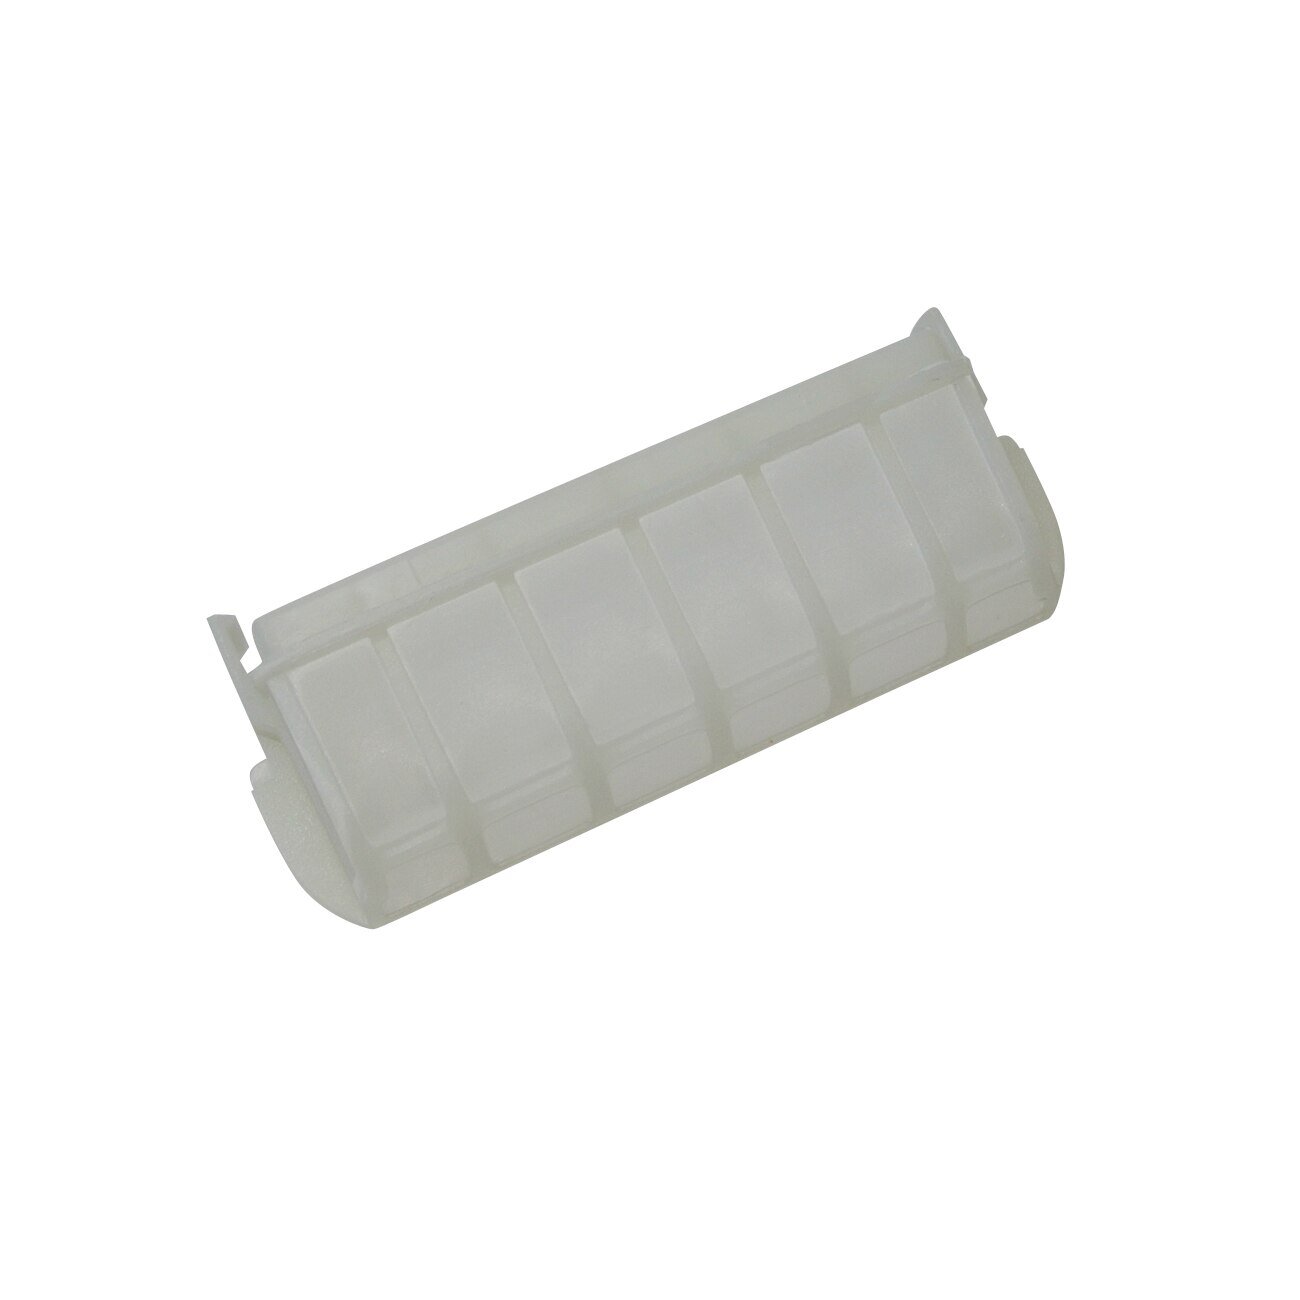 Air Filter for STIHL 021 023 025 MS210 MS230 MS250 Chainsaw